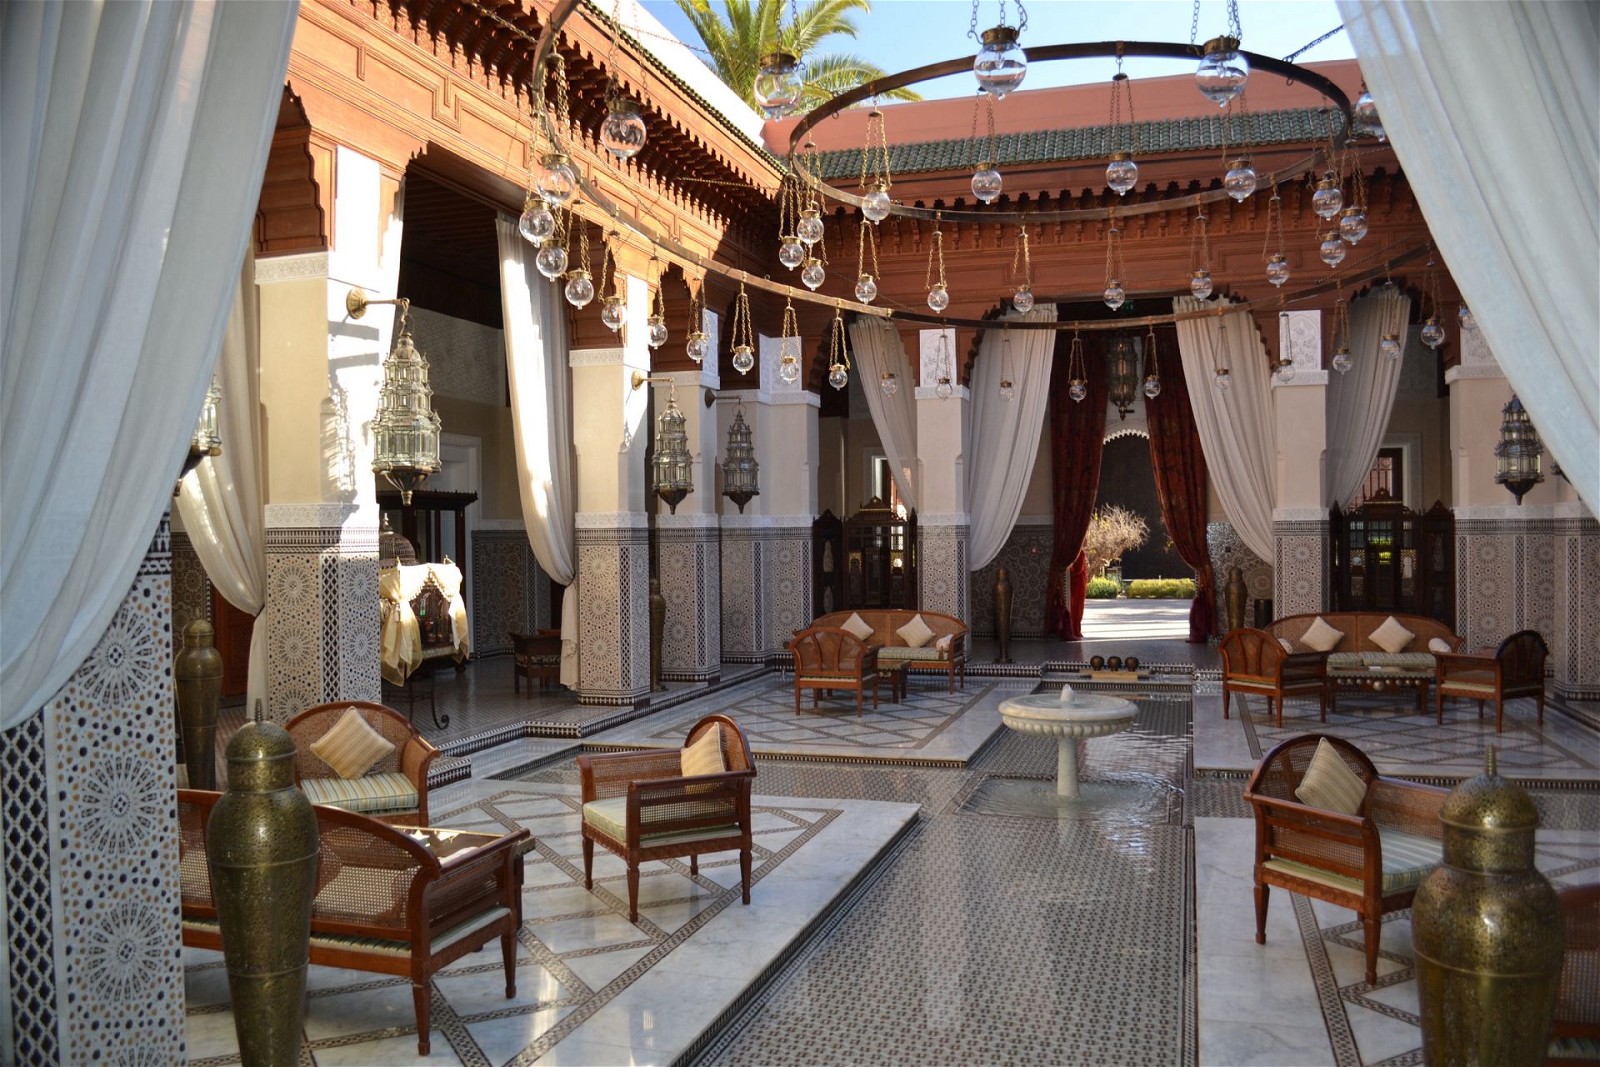 Royal Mansour: Located in the heart of Marrakech, the Royal Mansour is a pinnacle of luxury, elegance, and privacy. This opulent hotel is renowned for its intricate Moroccan architecture, lush gardens, and exceptional service. 